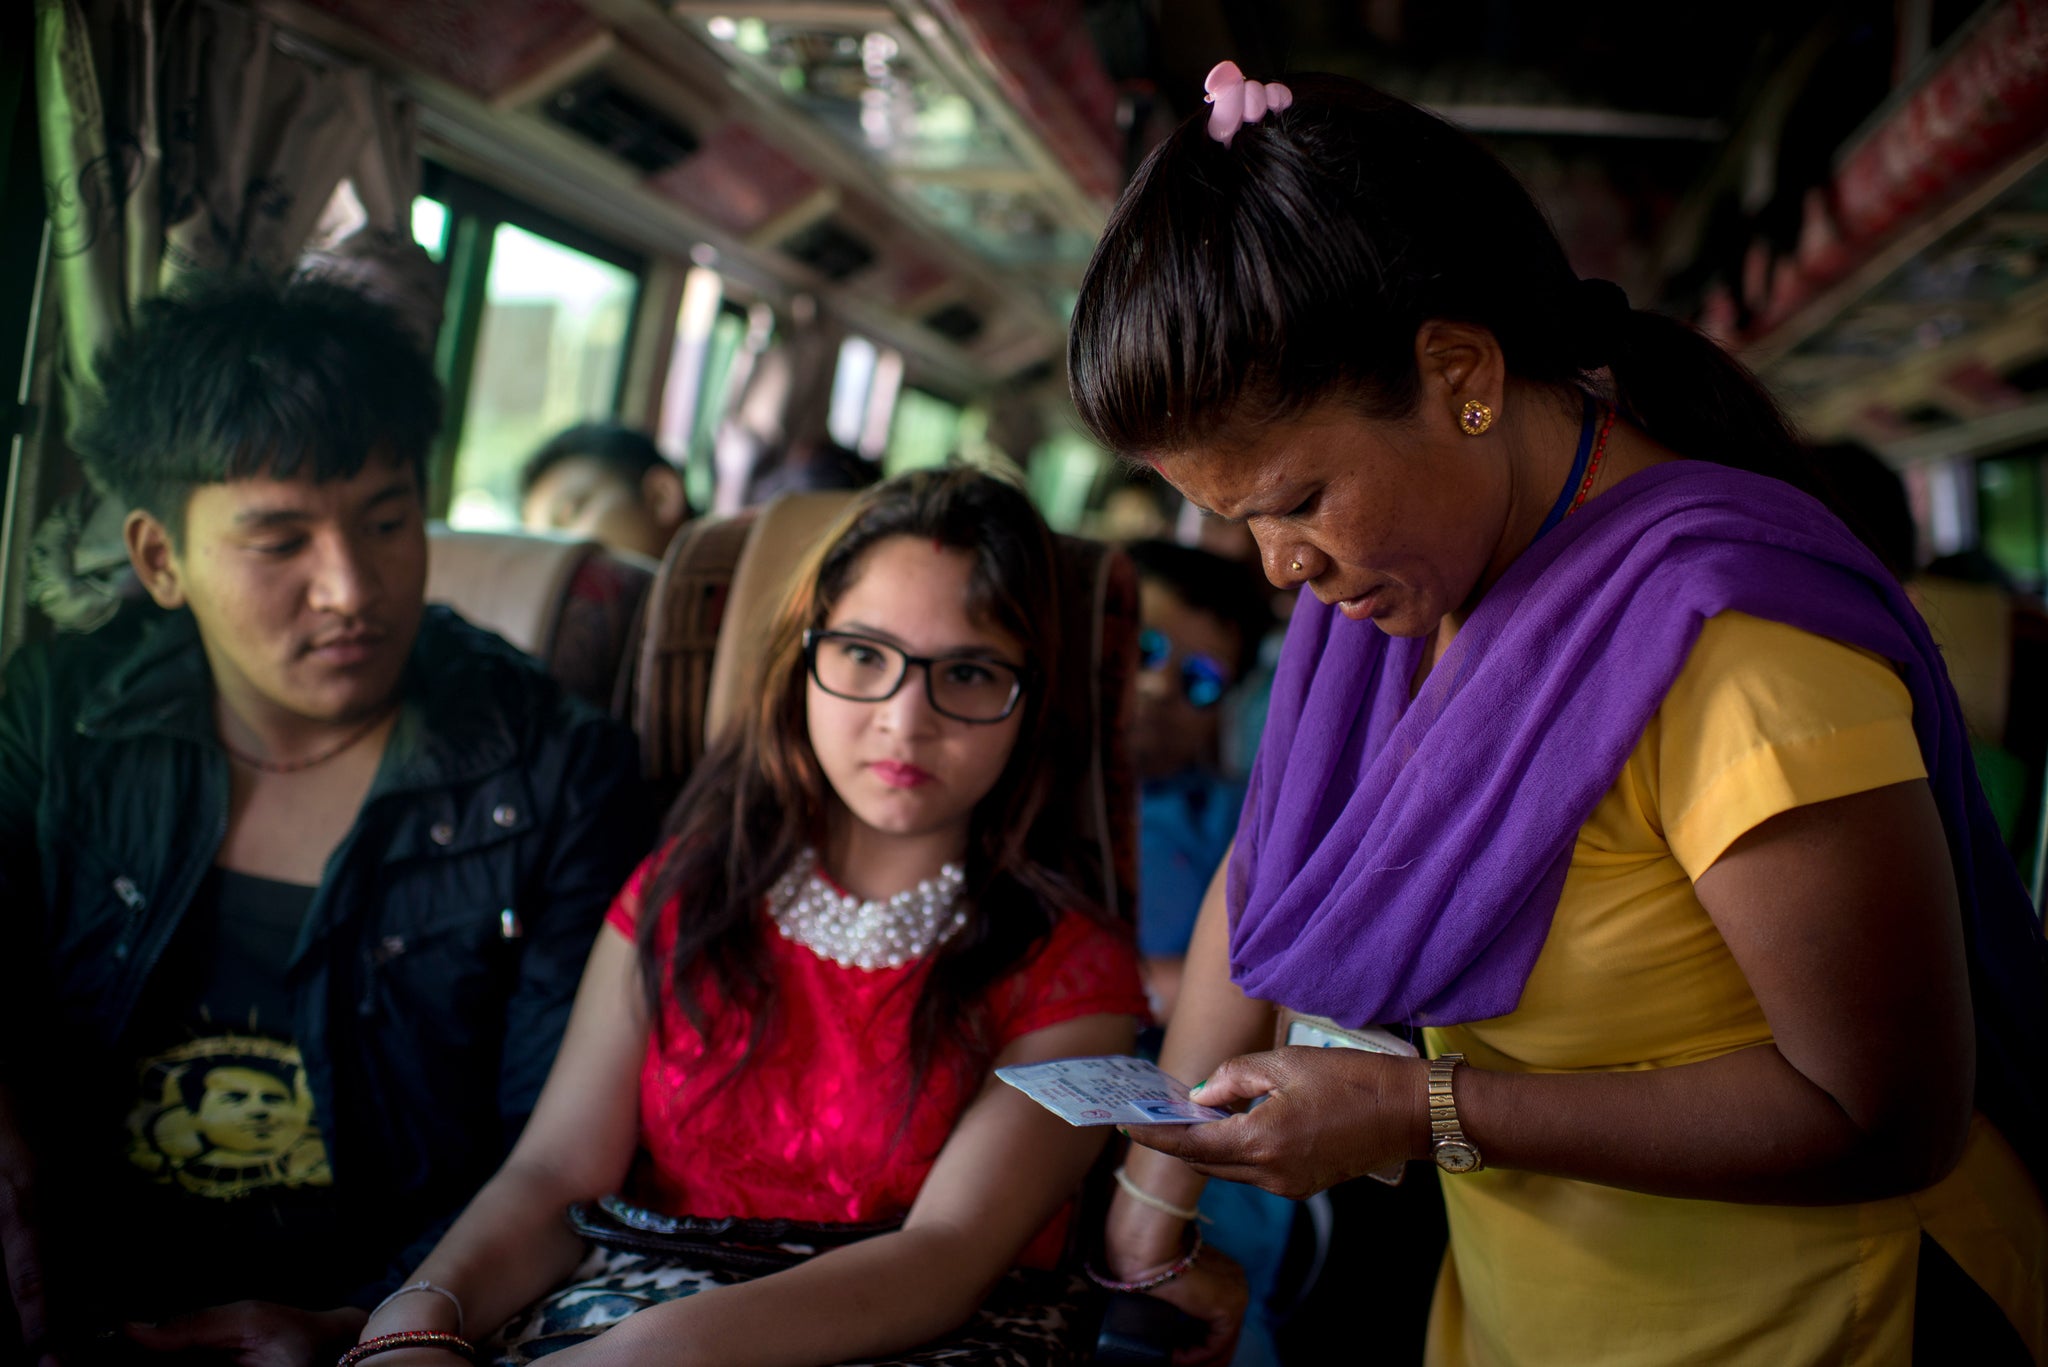 A worker for anti-trafficking organisation Mati Nepal checks a girl's ID on a bus to India, trying to ensure she is not being trafficked.